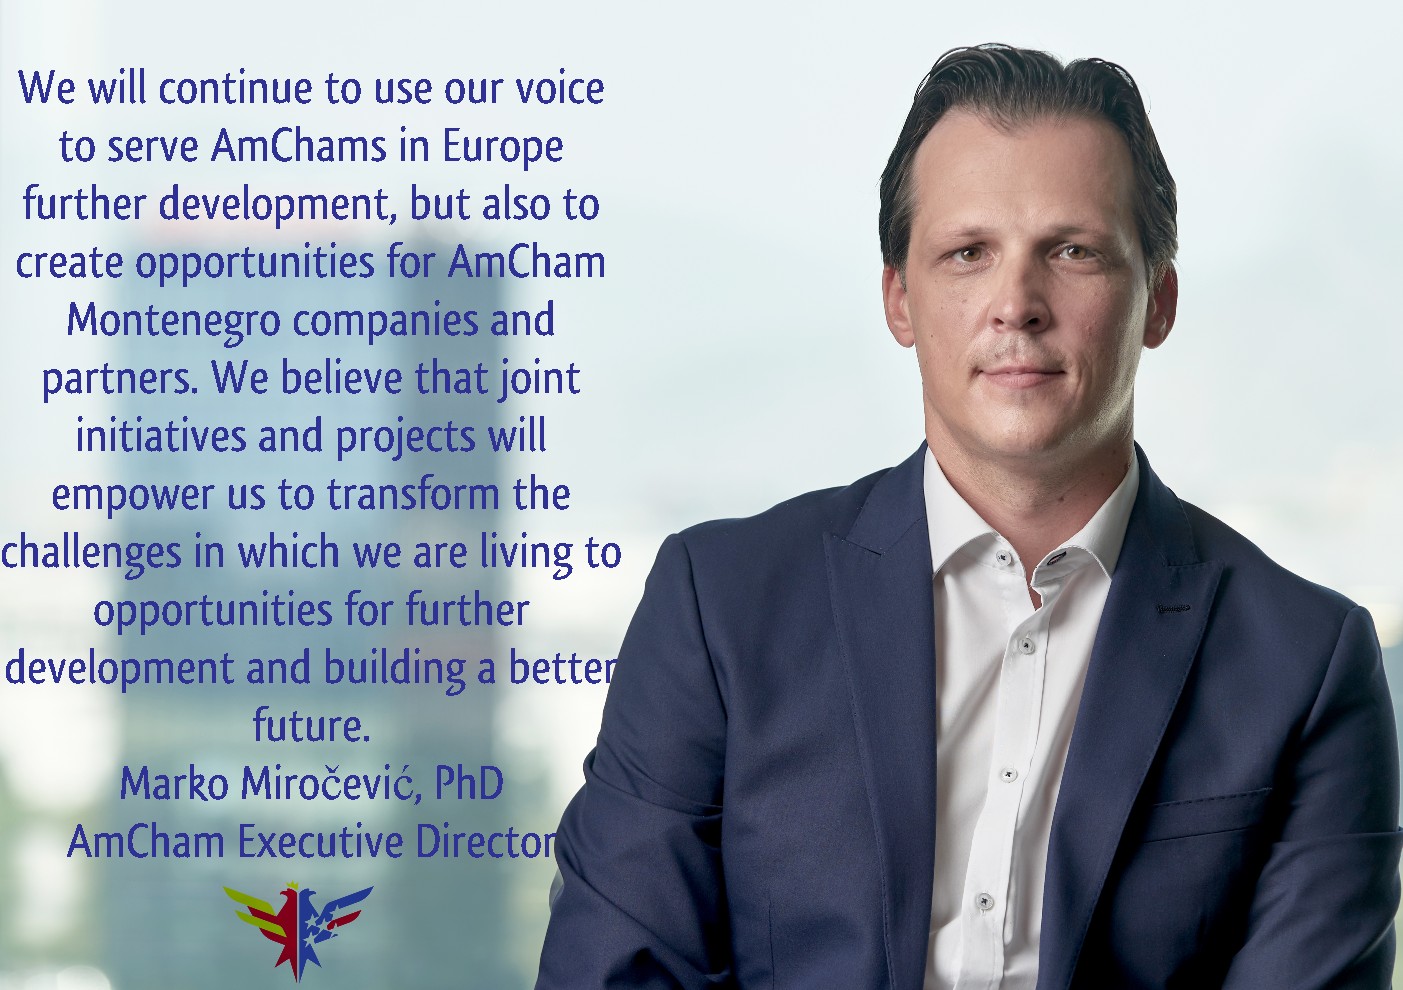 AmCham’s Executive Director Marko Miročević re-elected as a member of AmChams in Europe Executive Committee